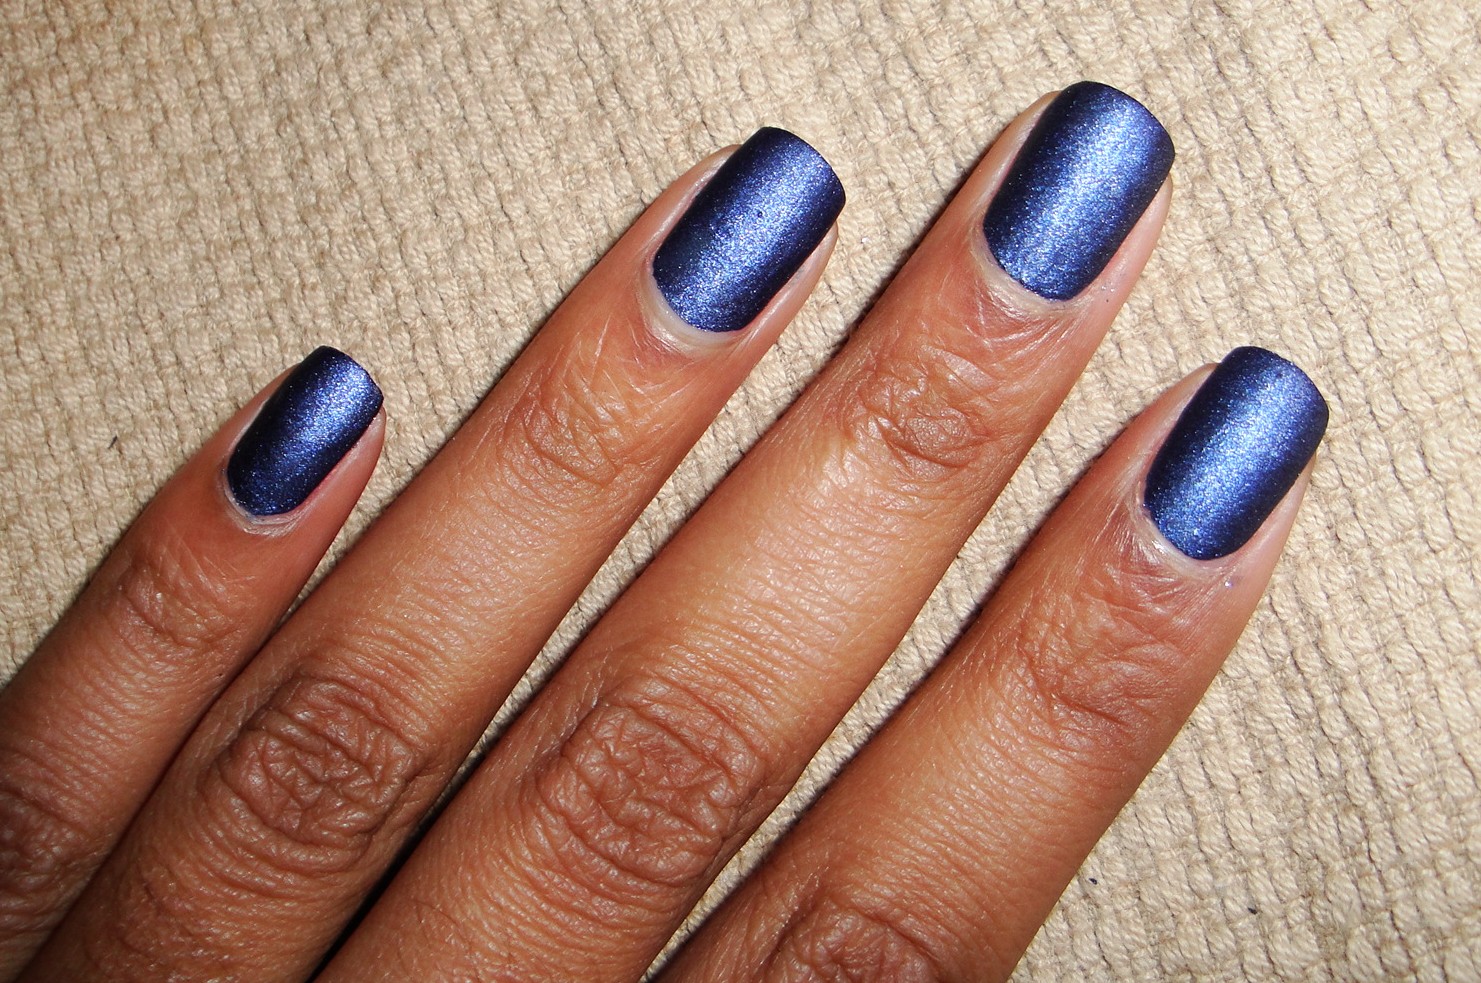 OPI Nail Lacquer in "Russian Navy" - wide 6